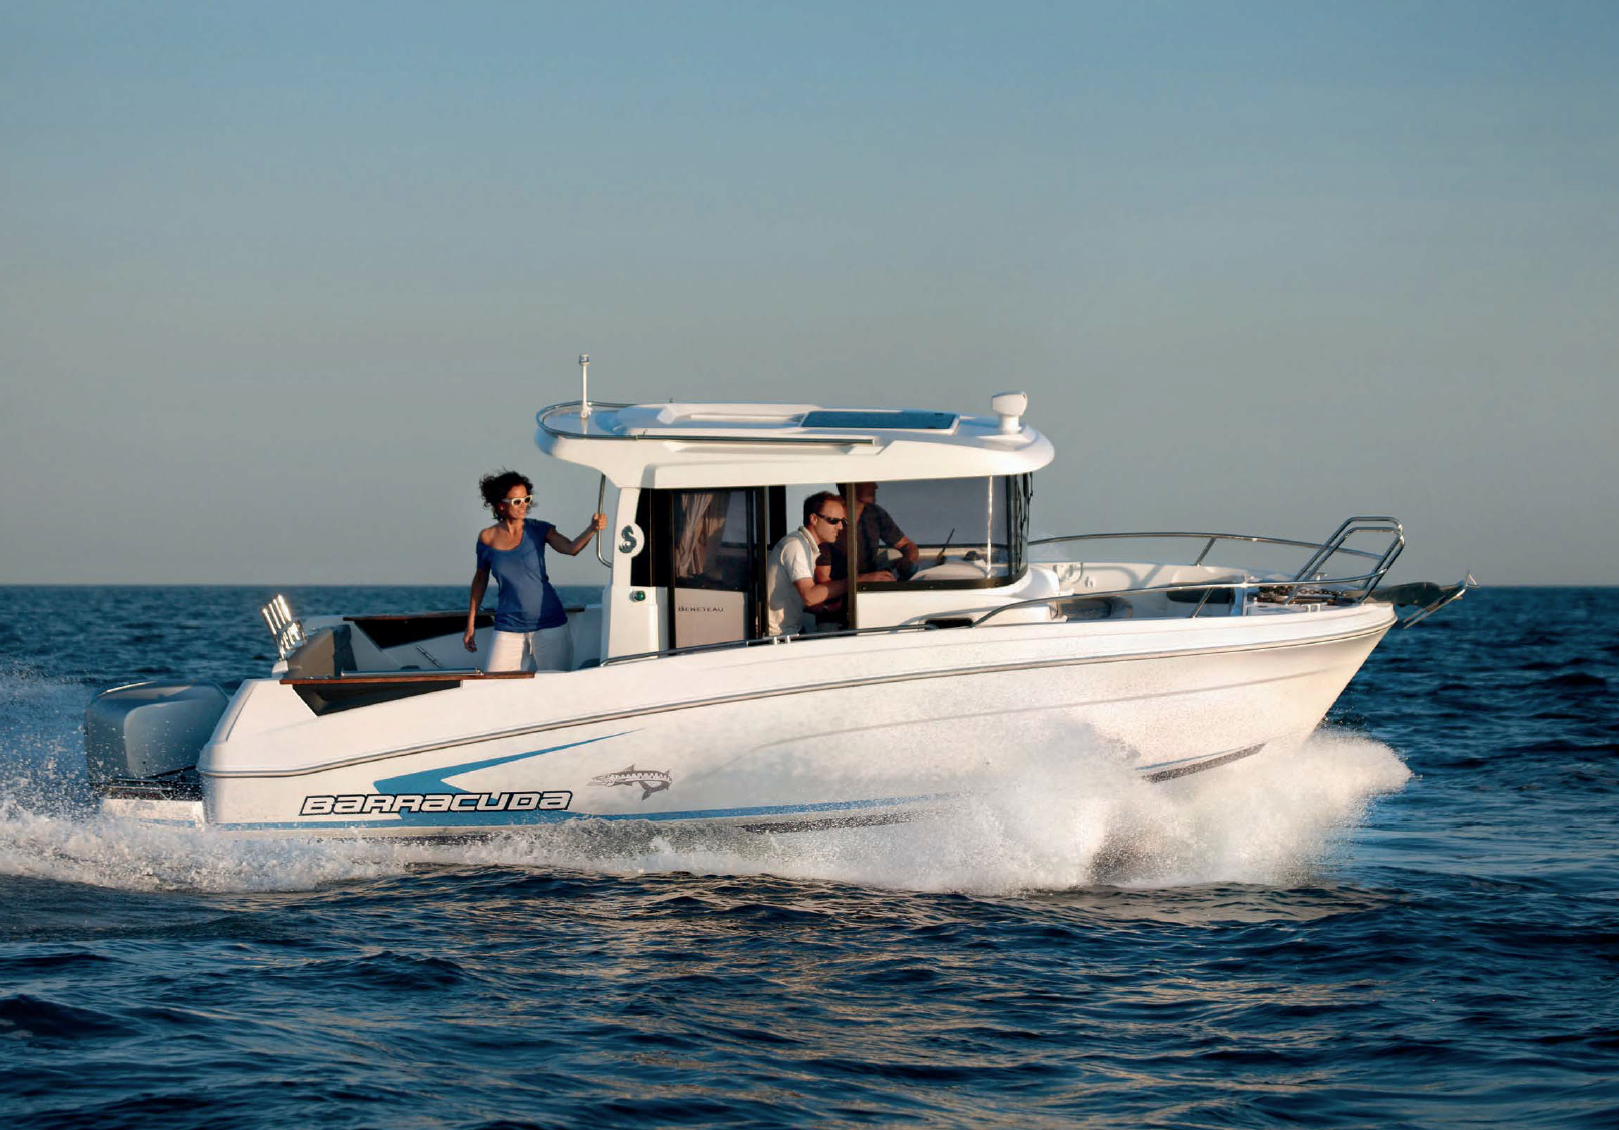 Fishing boats don’t get much more unique than this. The Barracuda 7 